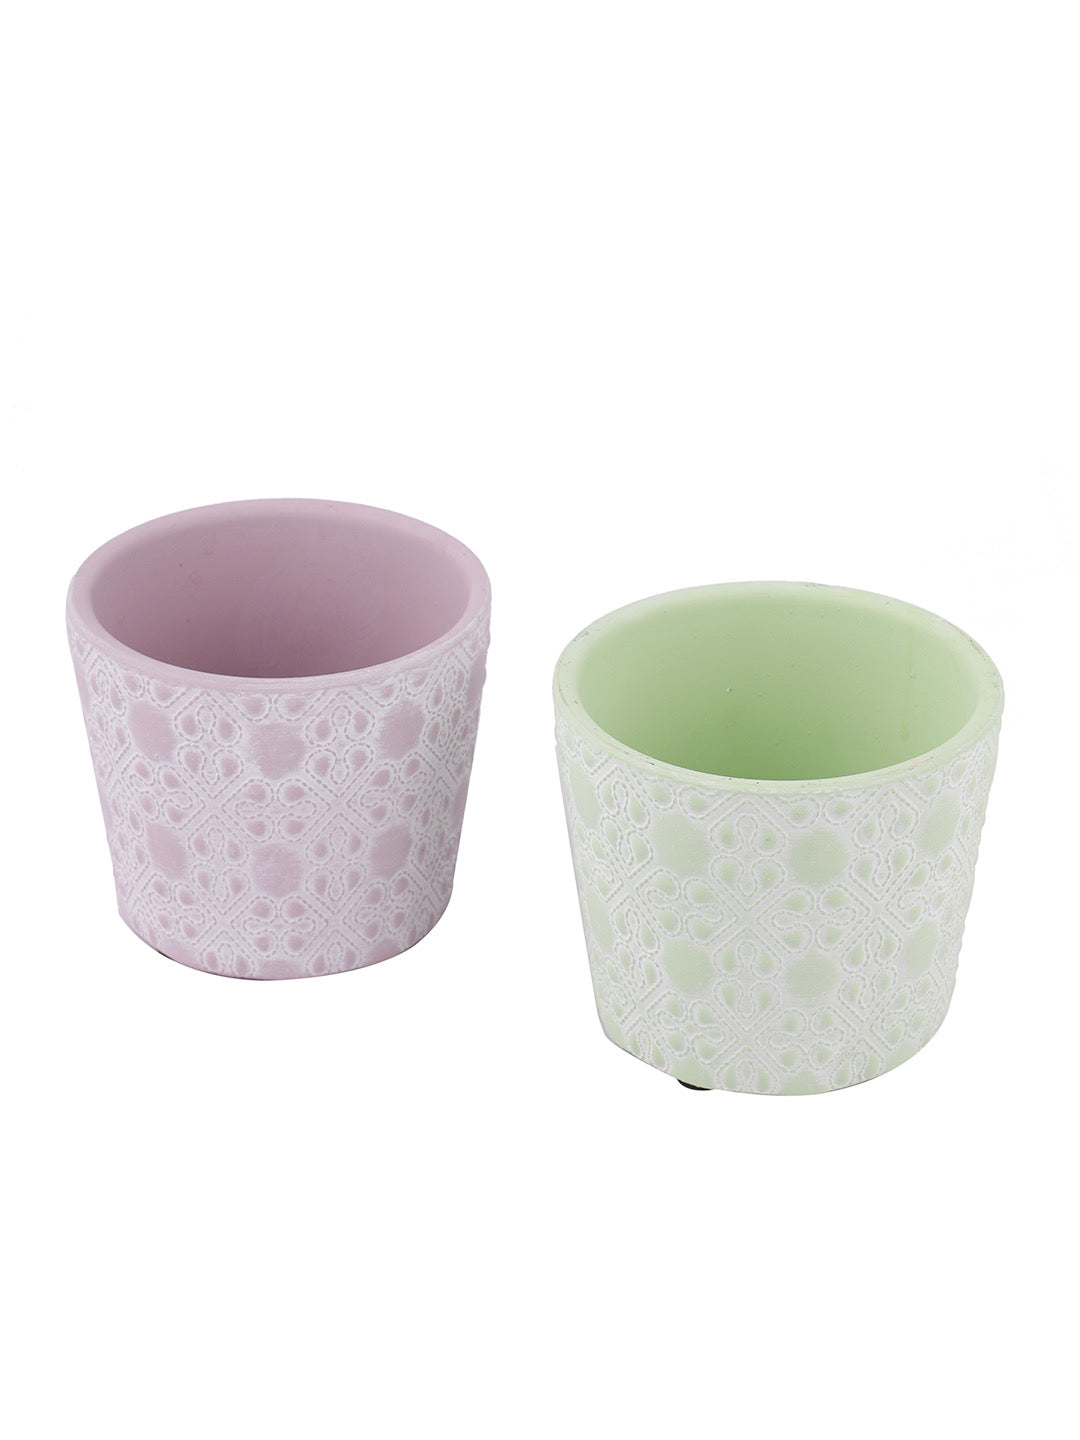 Two Purple and Green Flower design Planters - Default Title (CH210079_2)